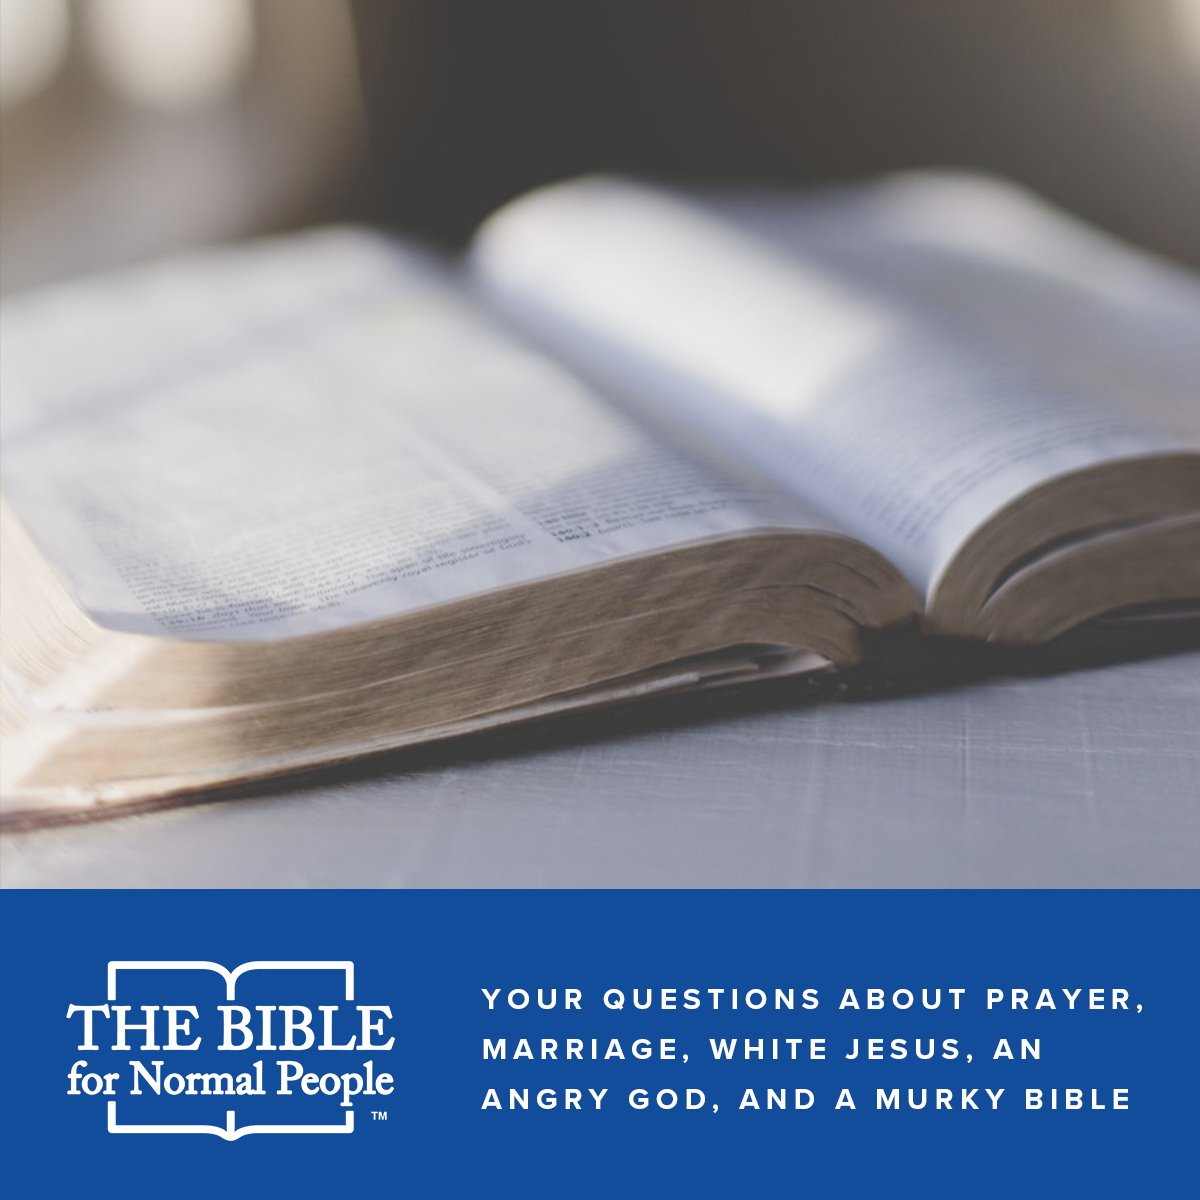 Episode 156 – Your Questions About Prayer, Marriage, White Jesus, an Angry God, and a Murky Bible